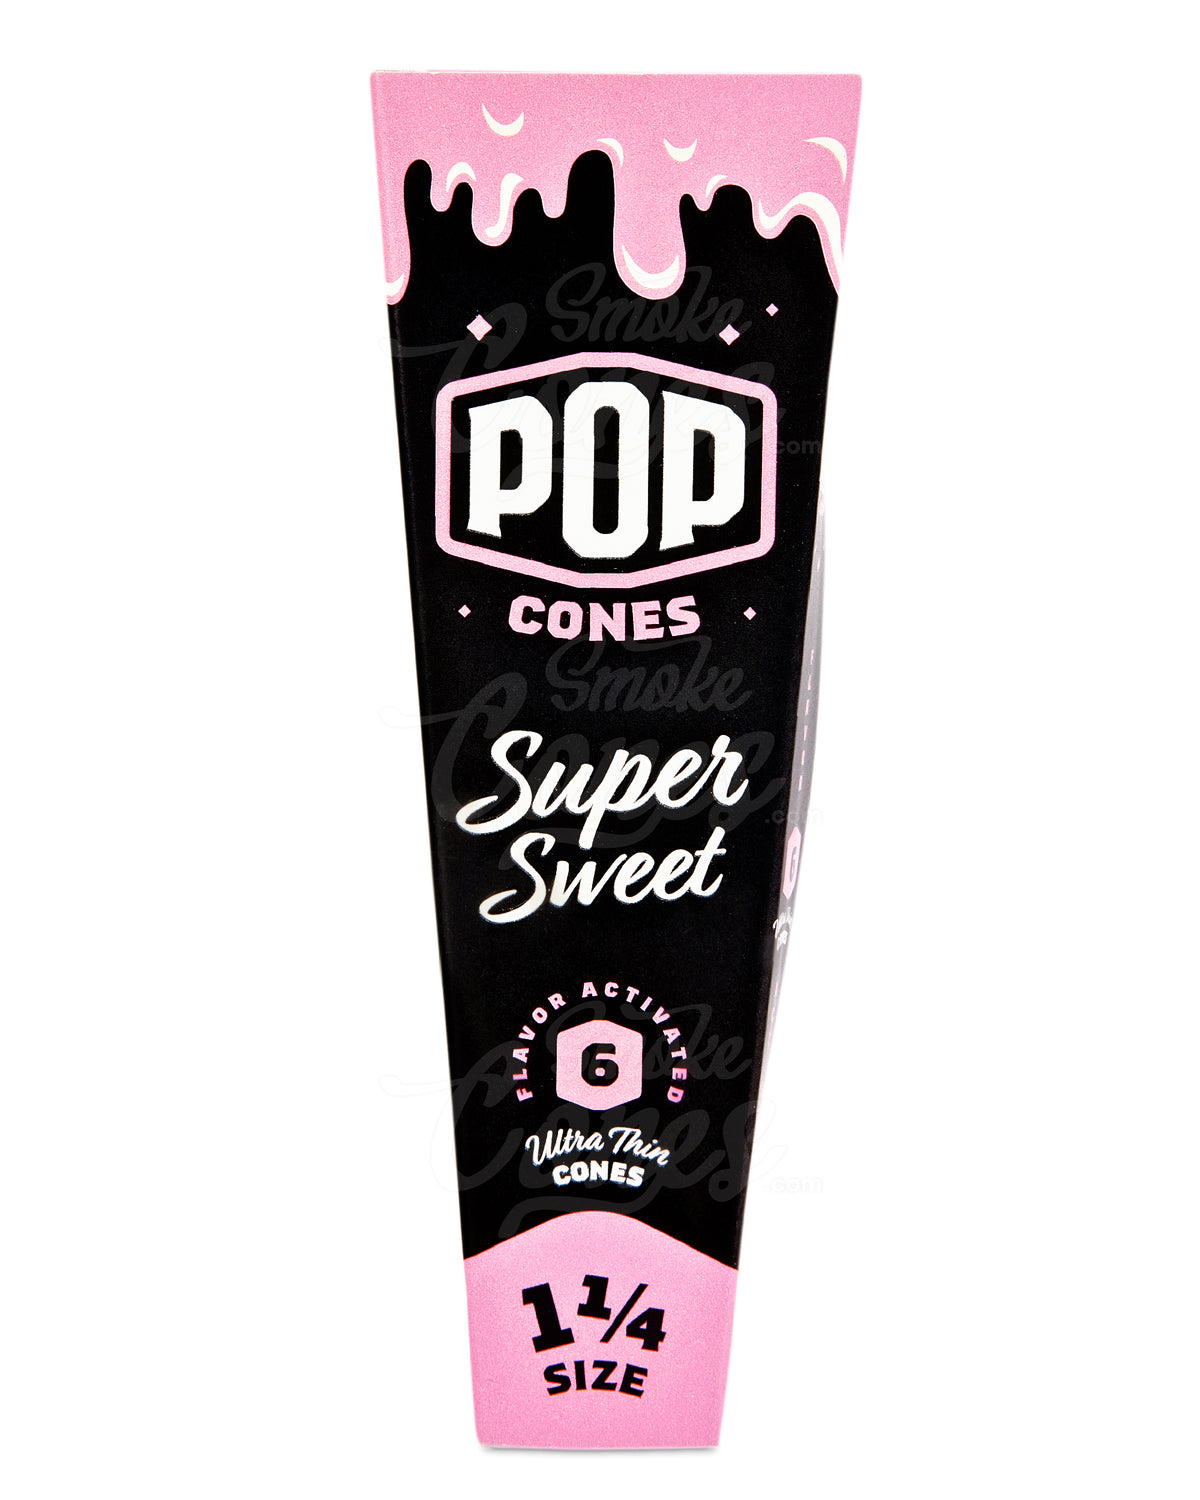 Pop Cones Super Sweet 84mm 1 1/4 Sized Pre Rolled Cones 24/Box